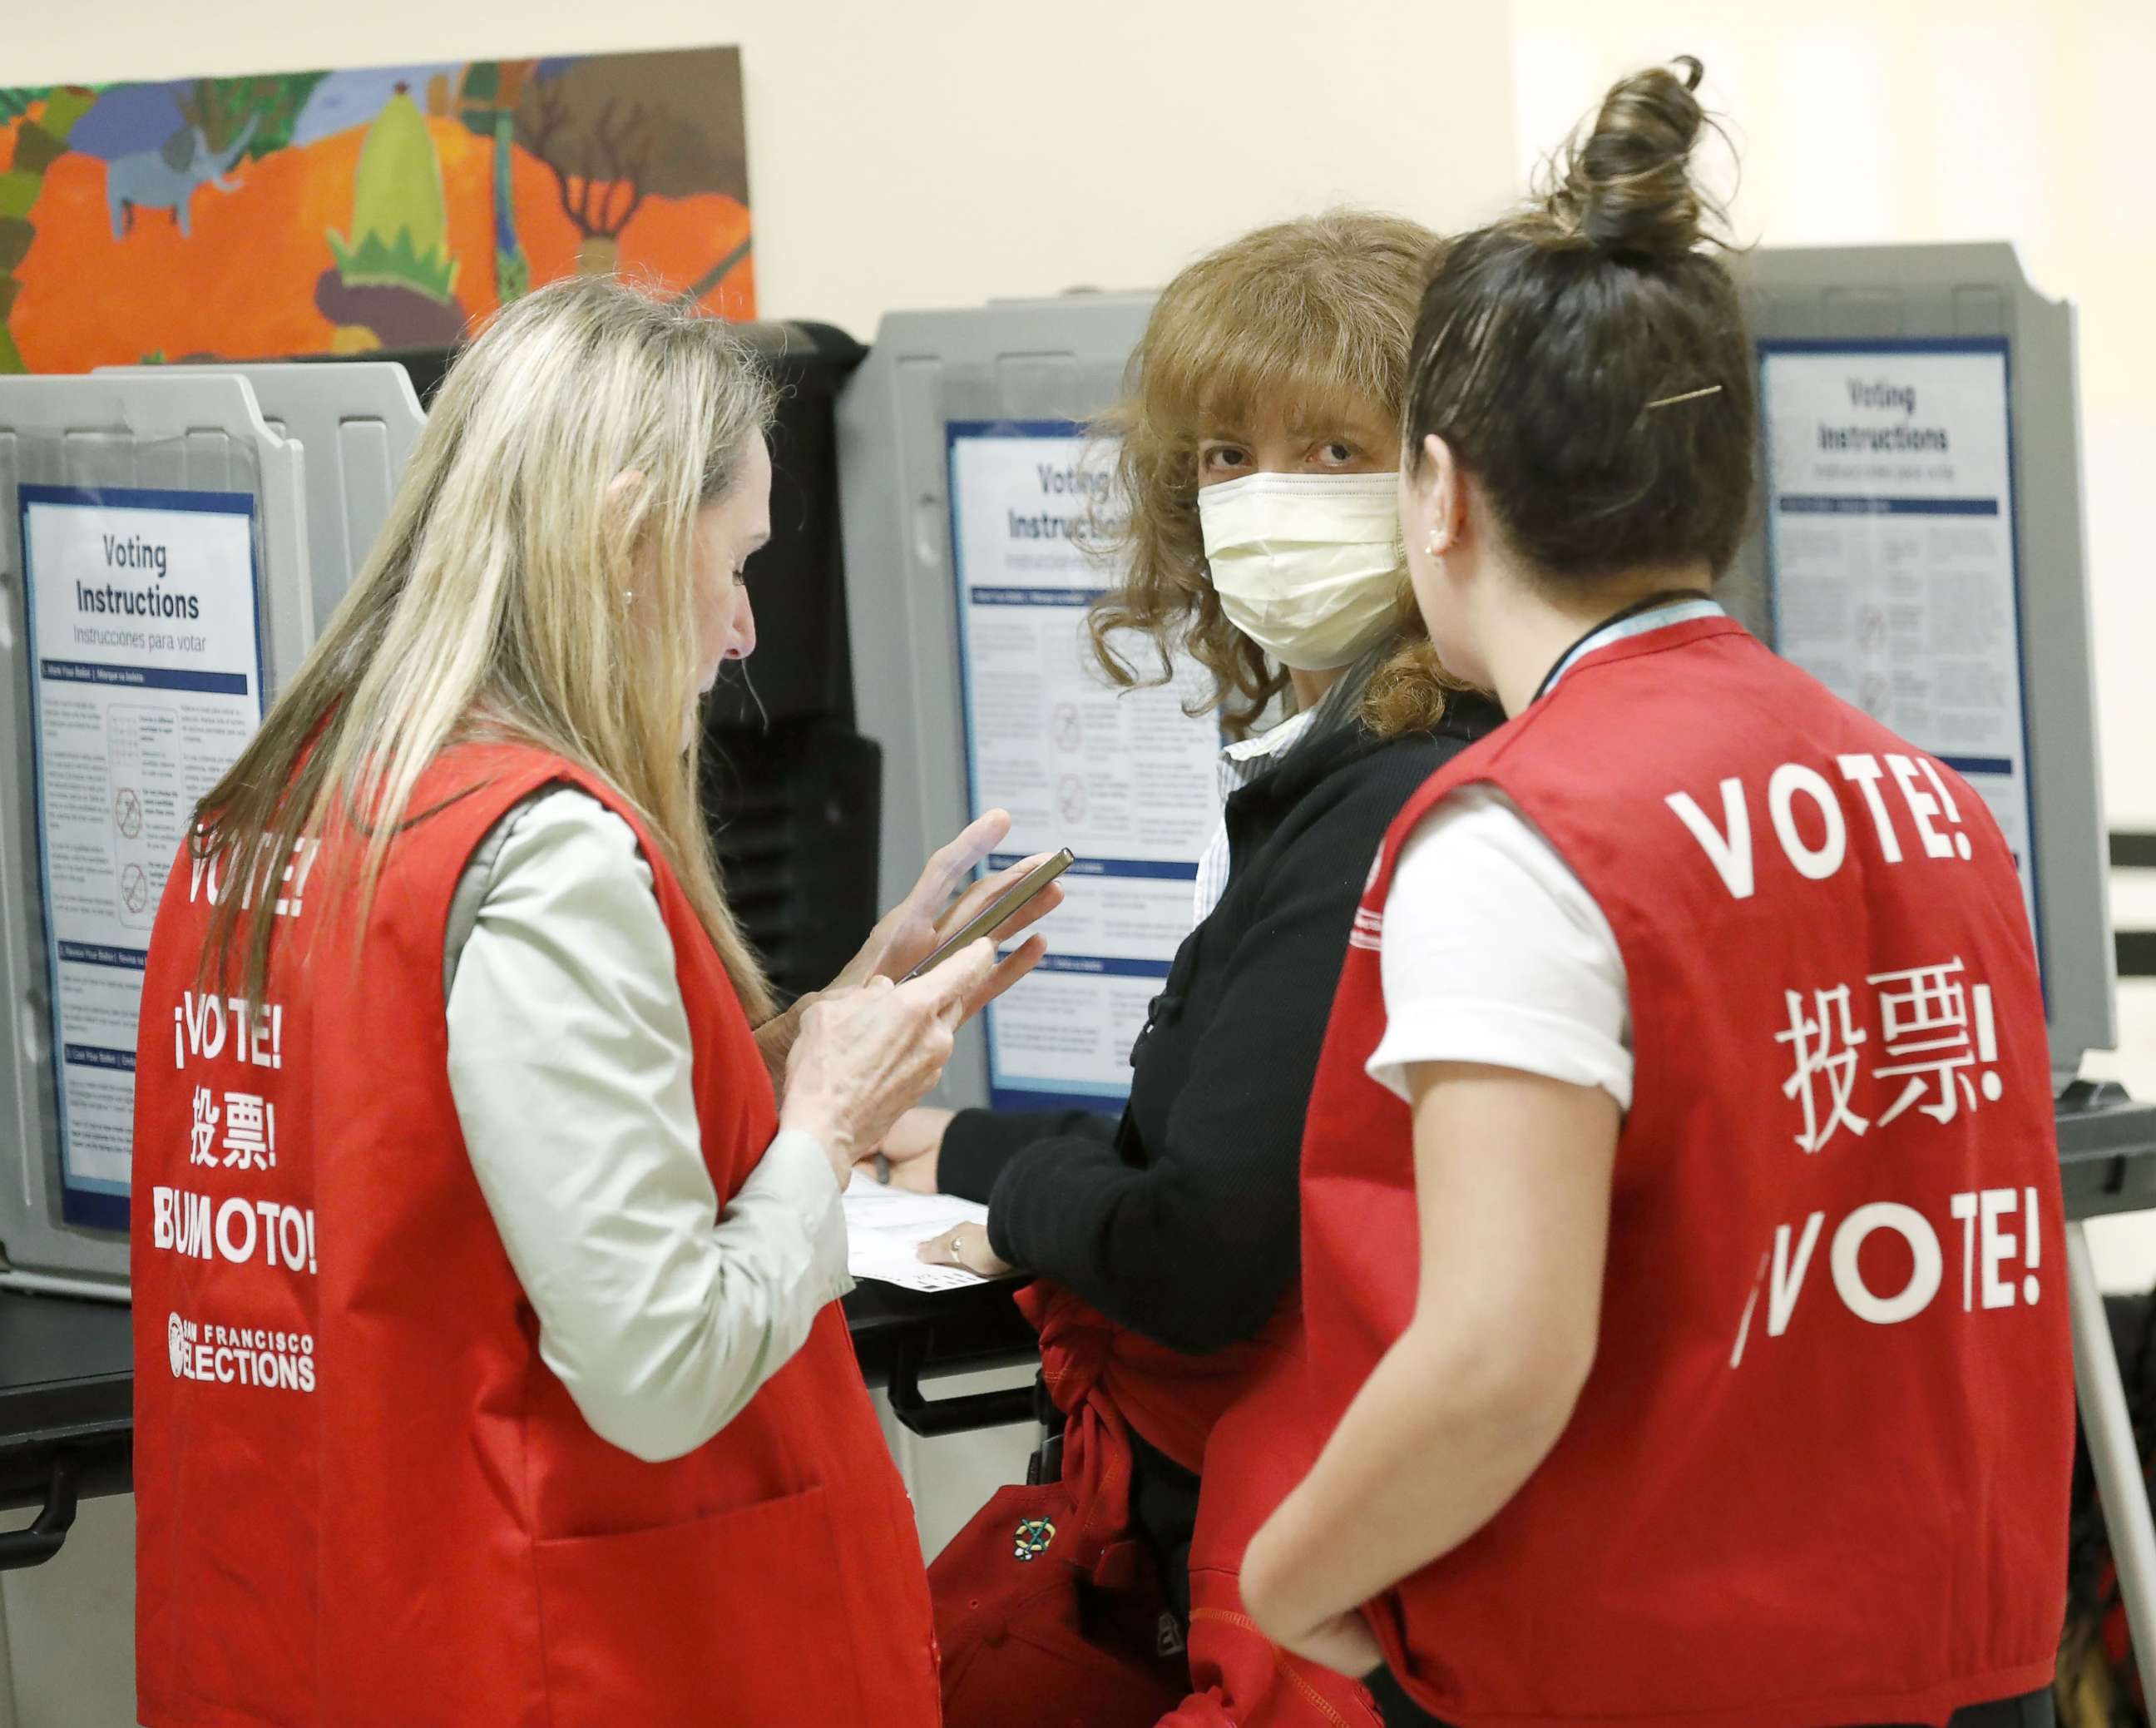 PHOTO: Poll workers speak to a woman wearing a face mask in a polling site at San Francisco City Hall on Super Tuesday, March 3, 2020, in San Francisco.